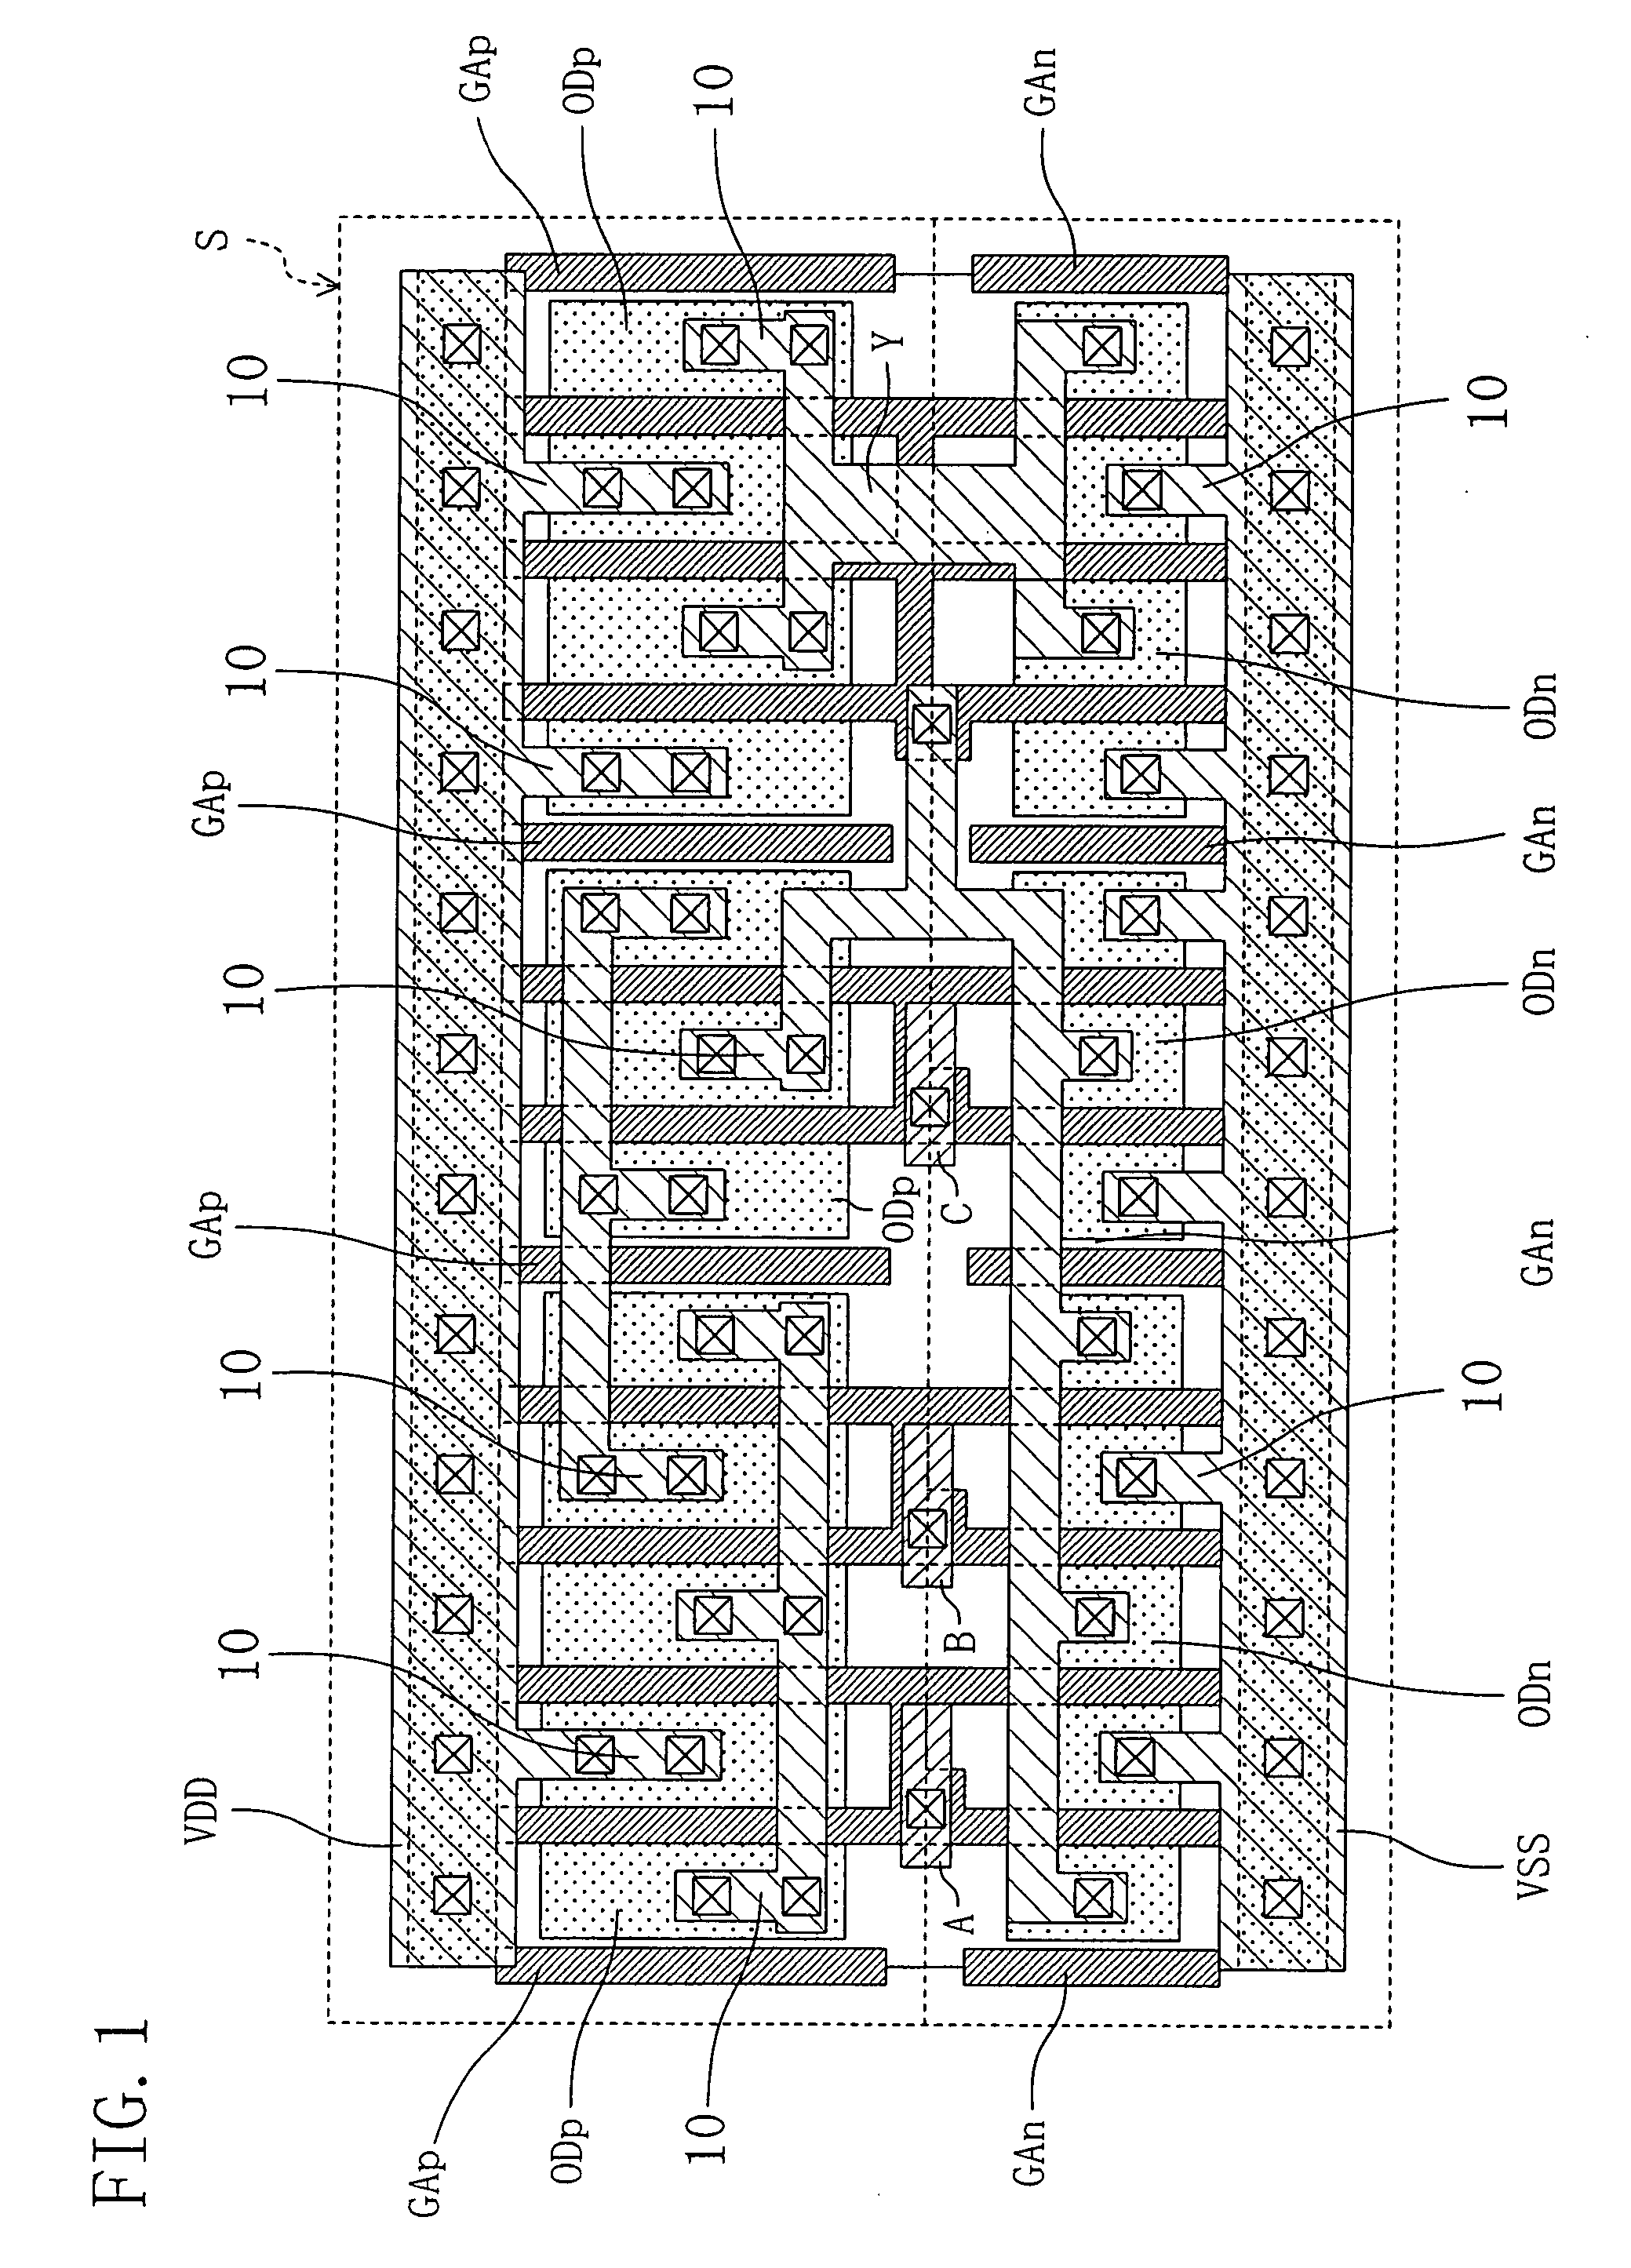 Method for variability constraints in design of integrated circuits especially digital circuits which includes timing closure upon placement and routing of digital circuit or network